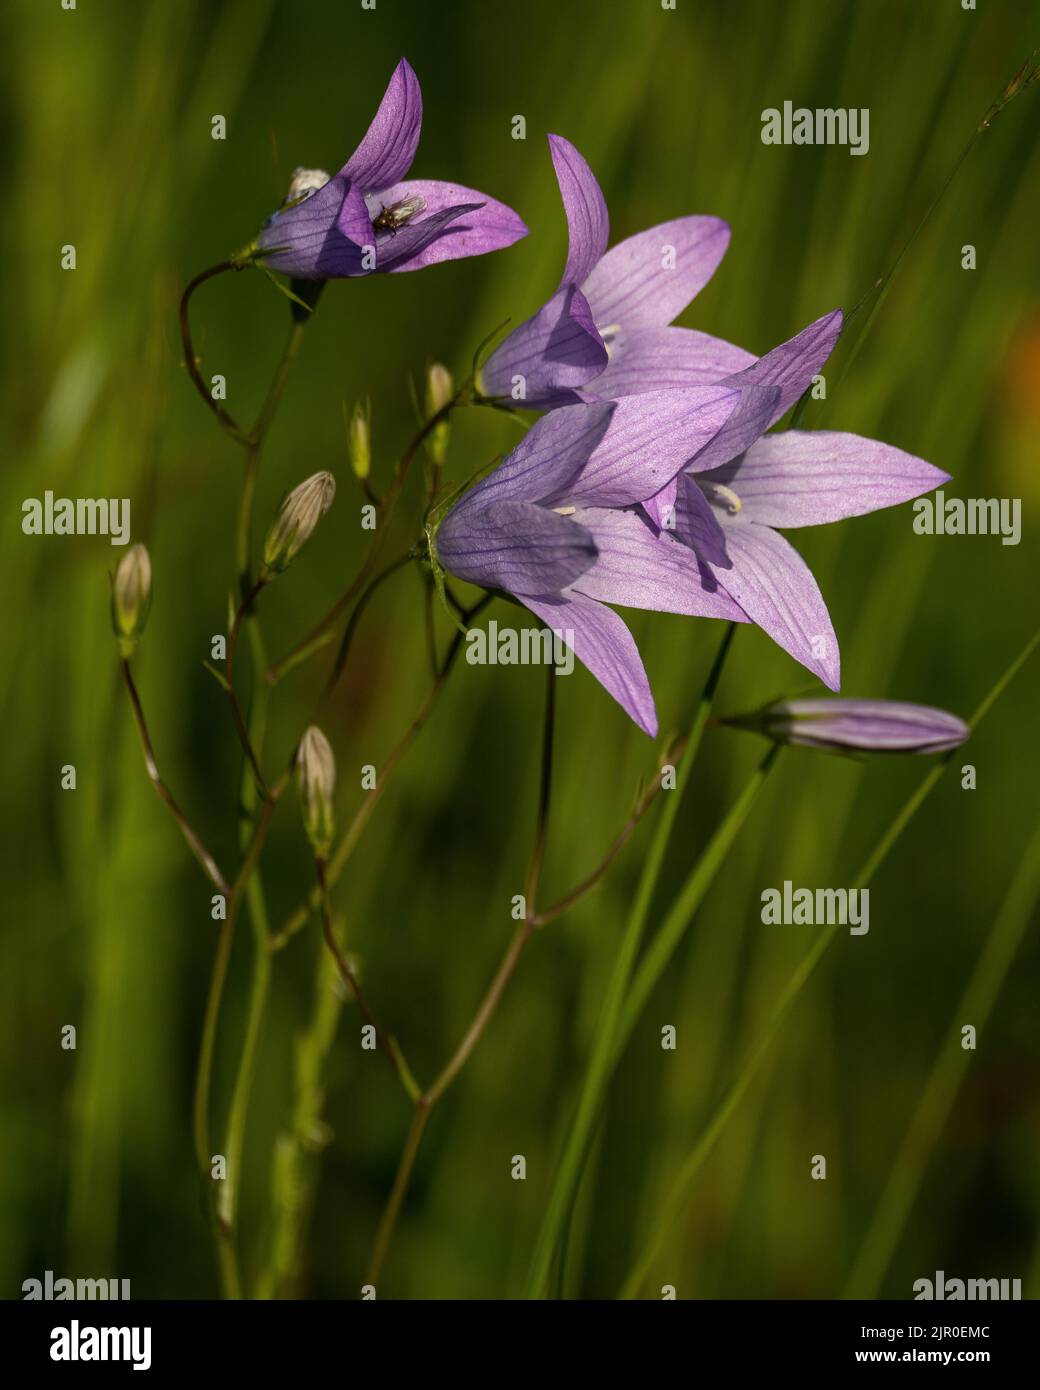 A closeup of spreading bellflowers blooming in the meadow Stock Photo